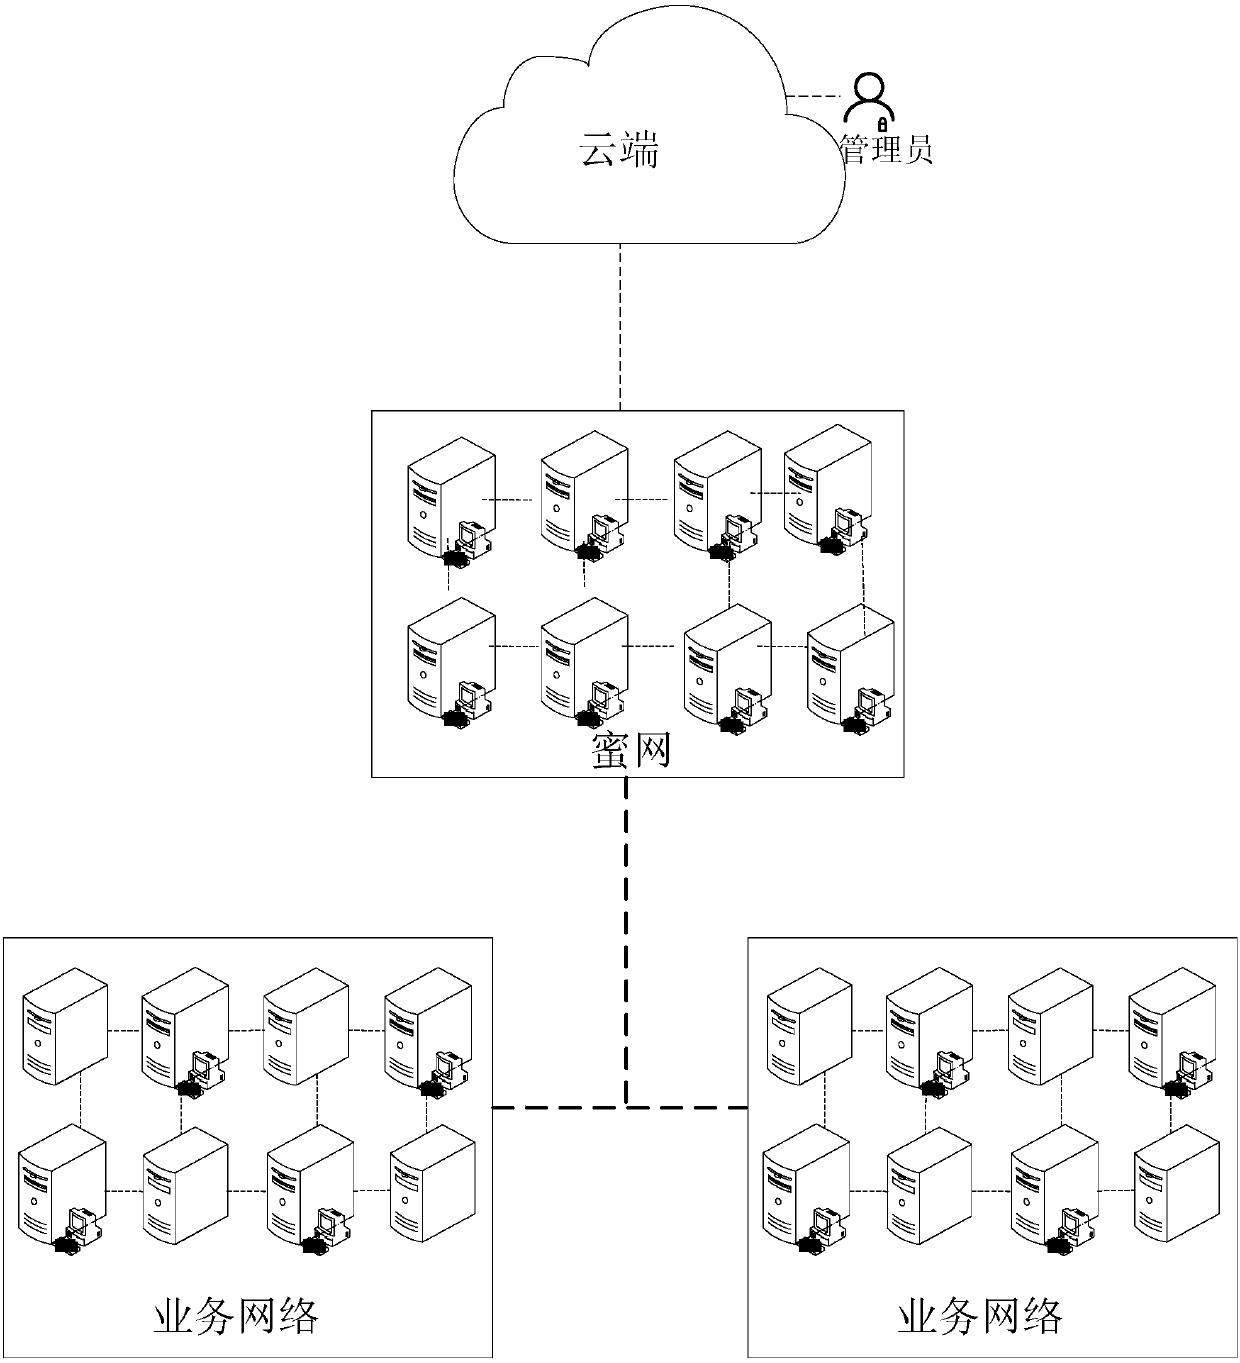 Network security protection system and related method